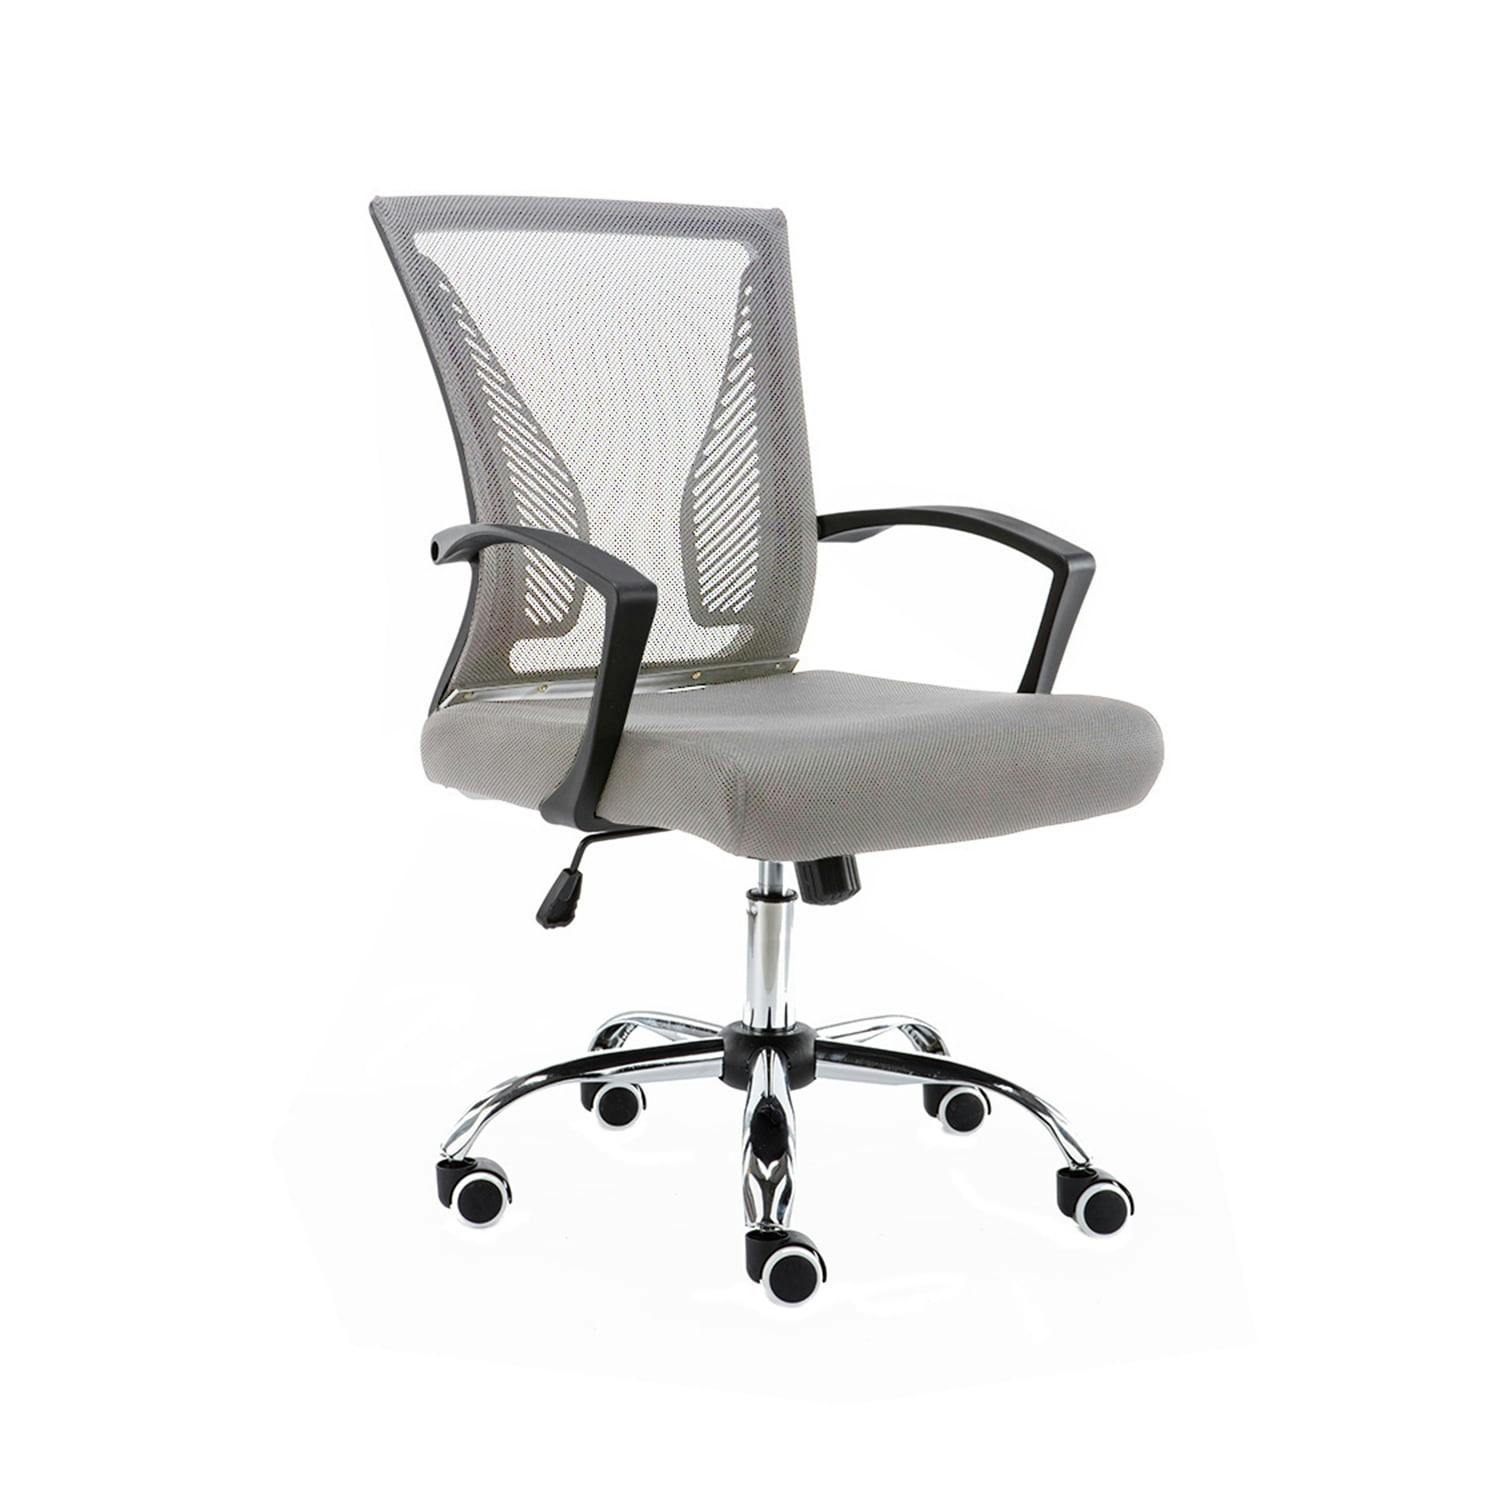 Zuna Mid-Back Swivel Task Chair in Black and Gray Mesh